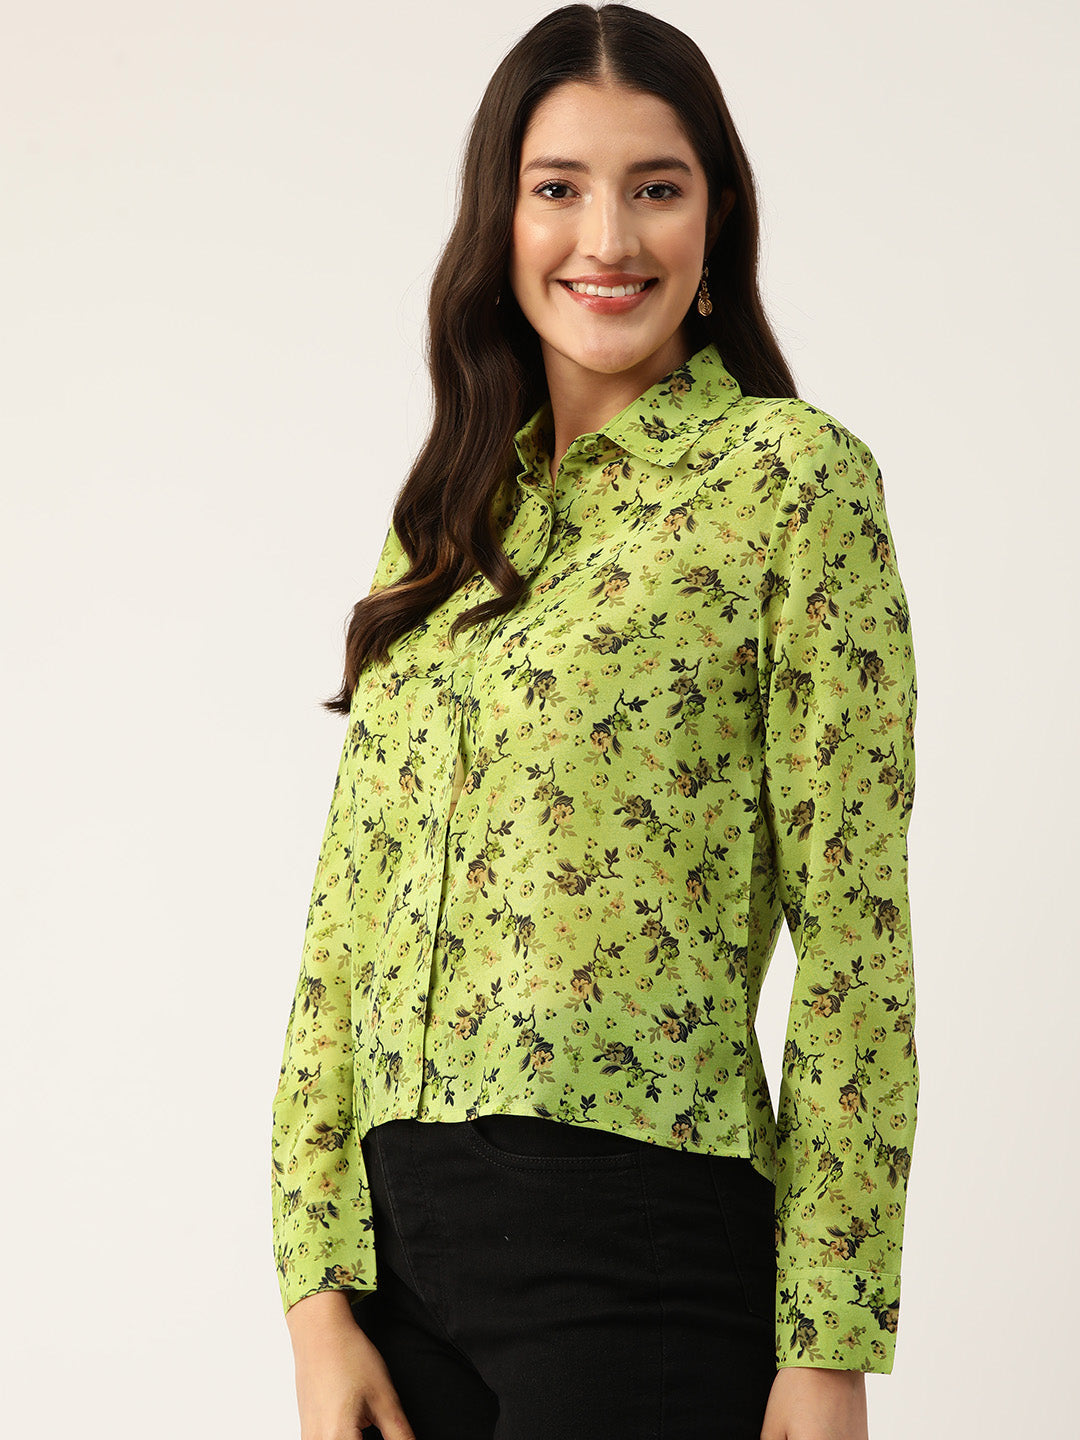 Women Floral Yellow Opaque Printed Casual Shirt